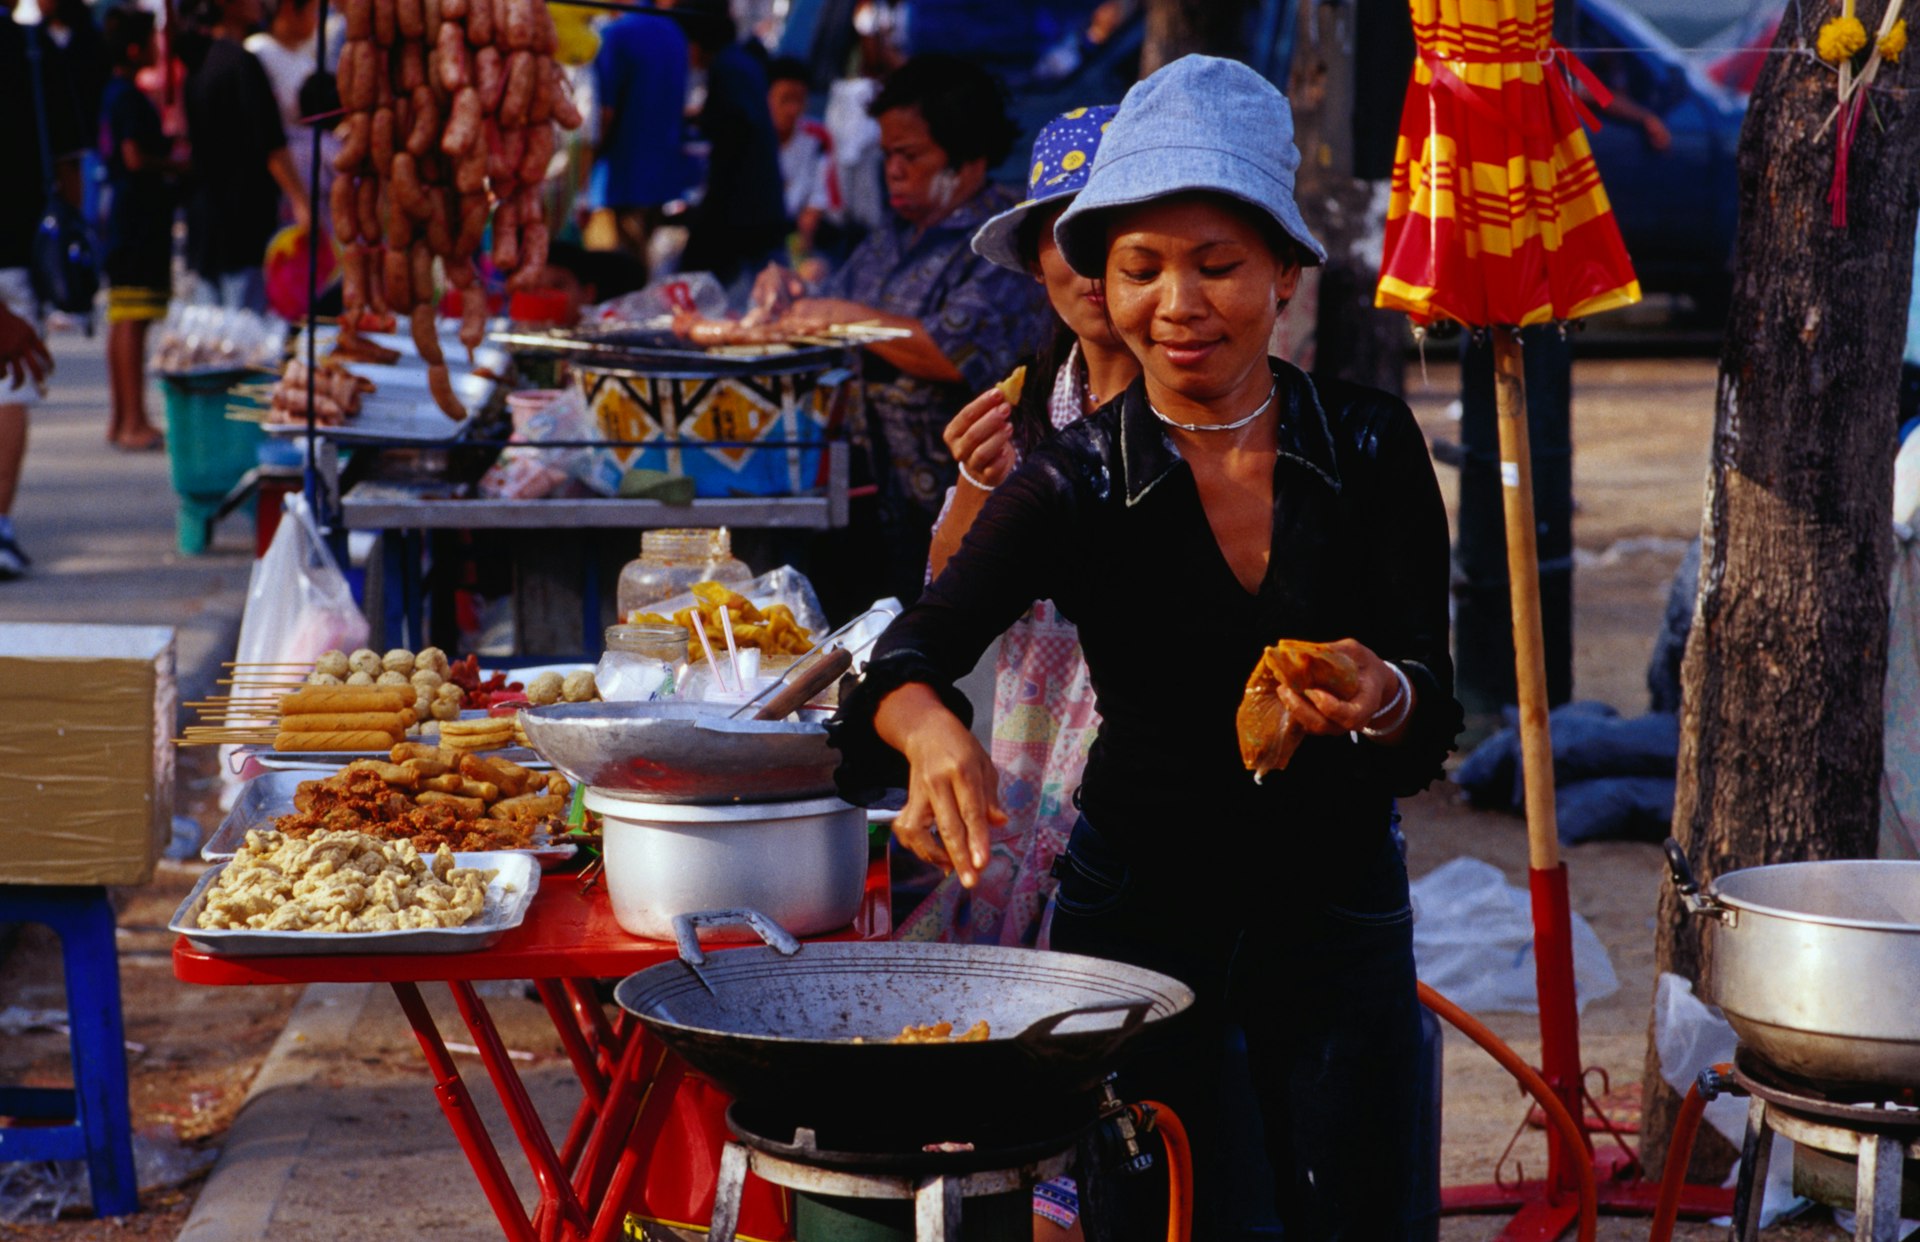 Vendor cooking at her stall in Sanam Luang gardens in Ratanakosin